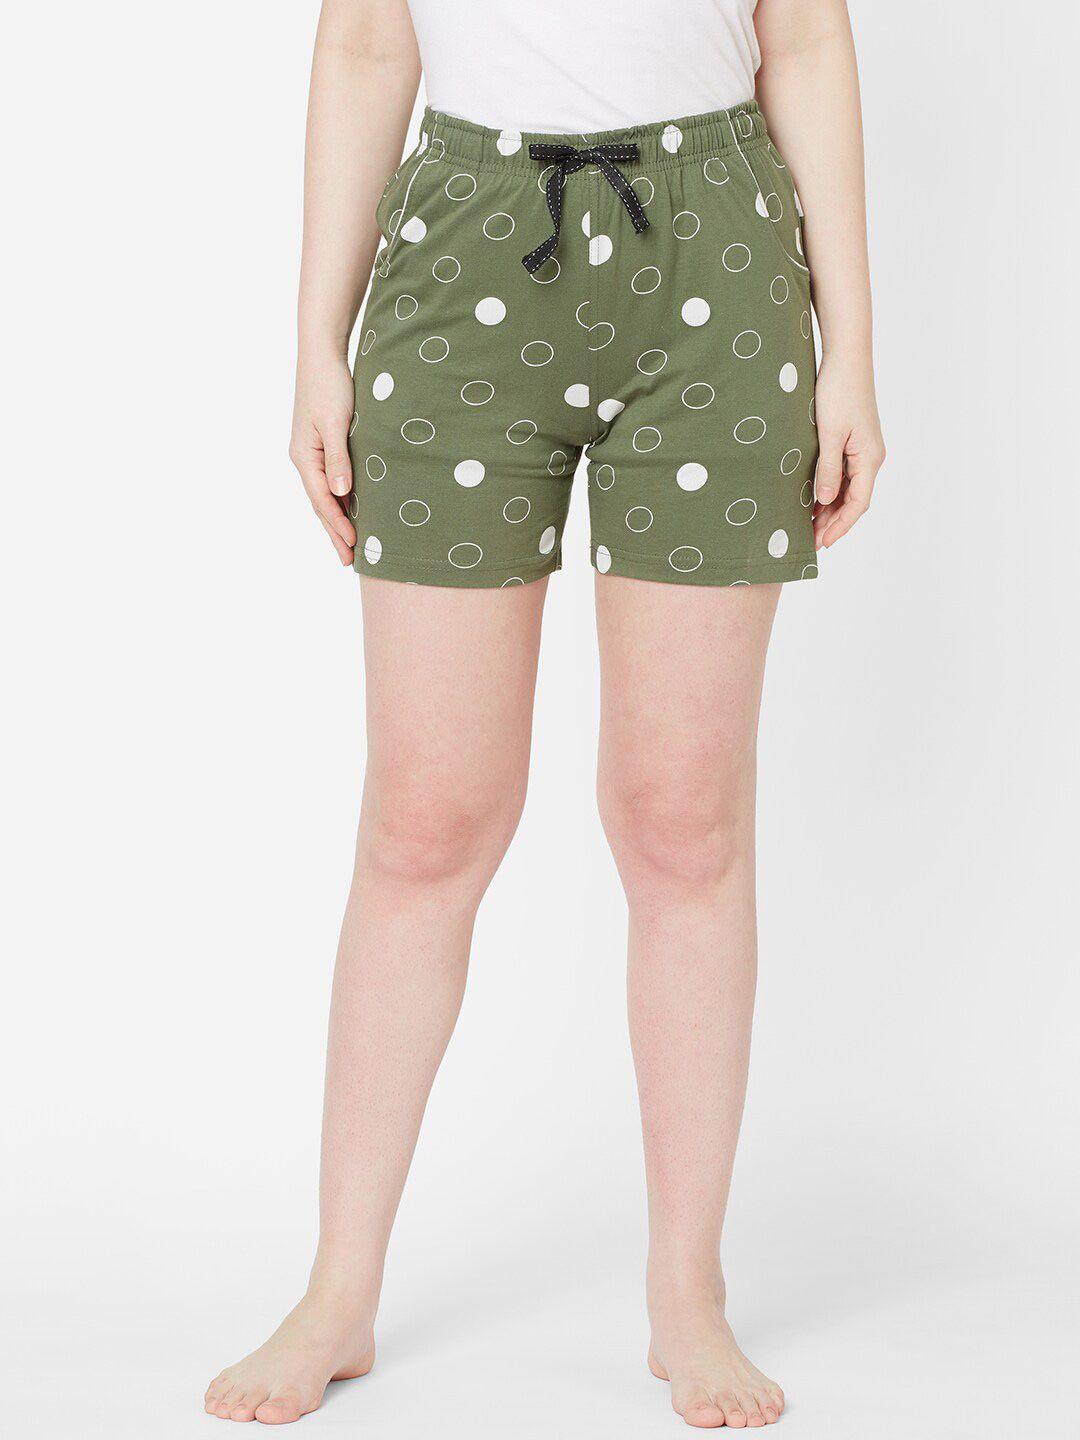 sweet-dreams-women-olive-green-&-white-printed-lounge-shorts